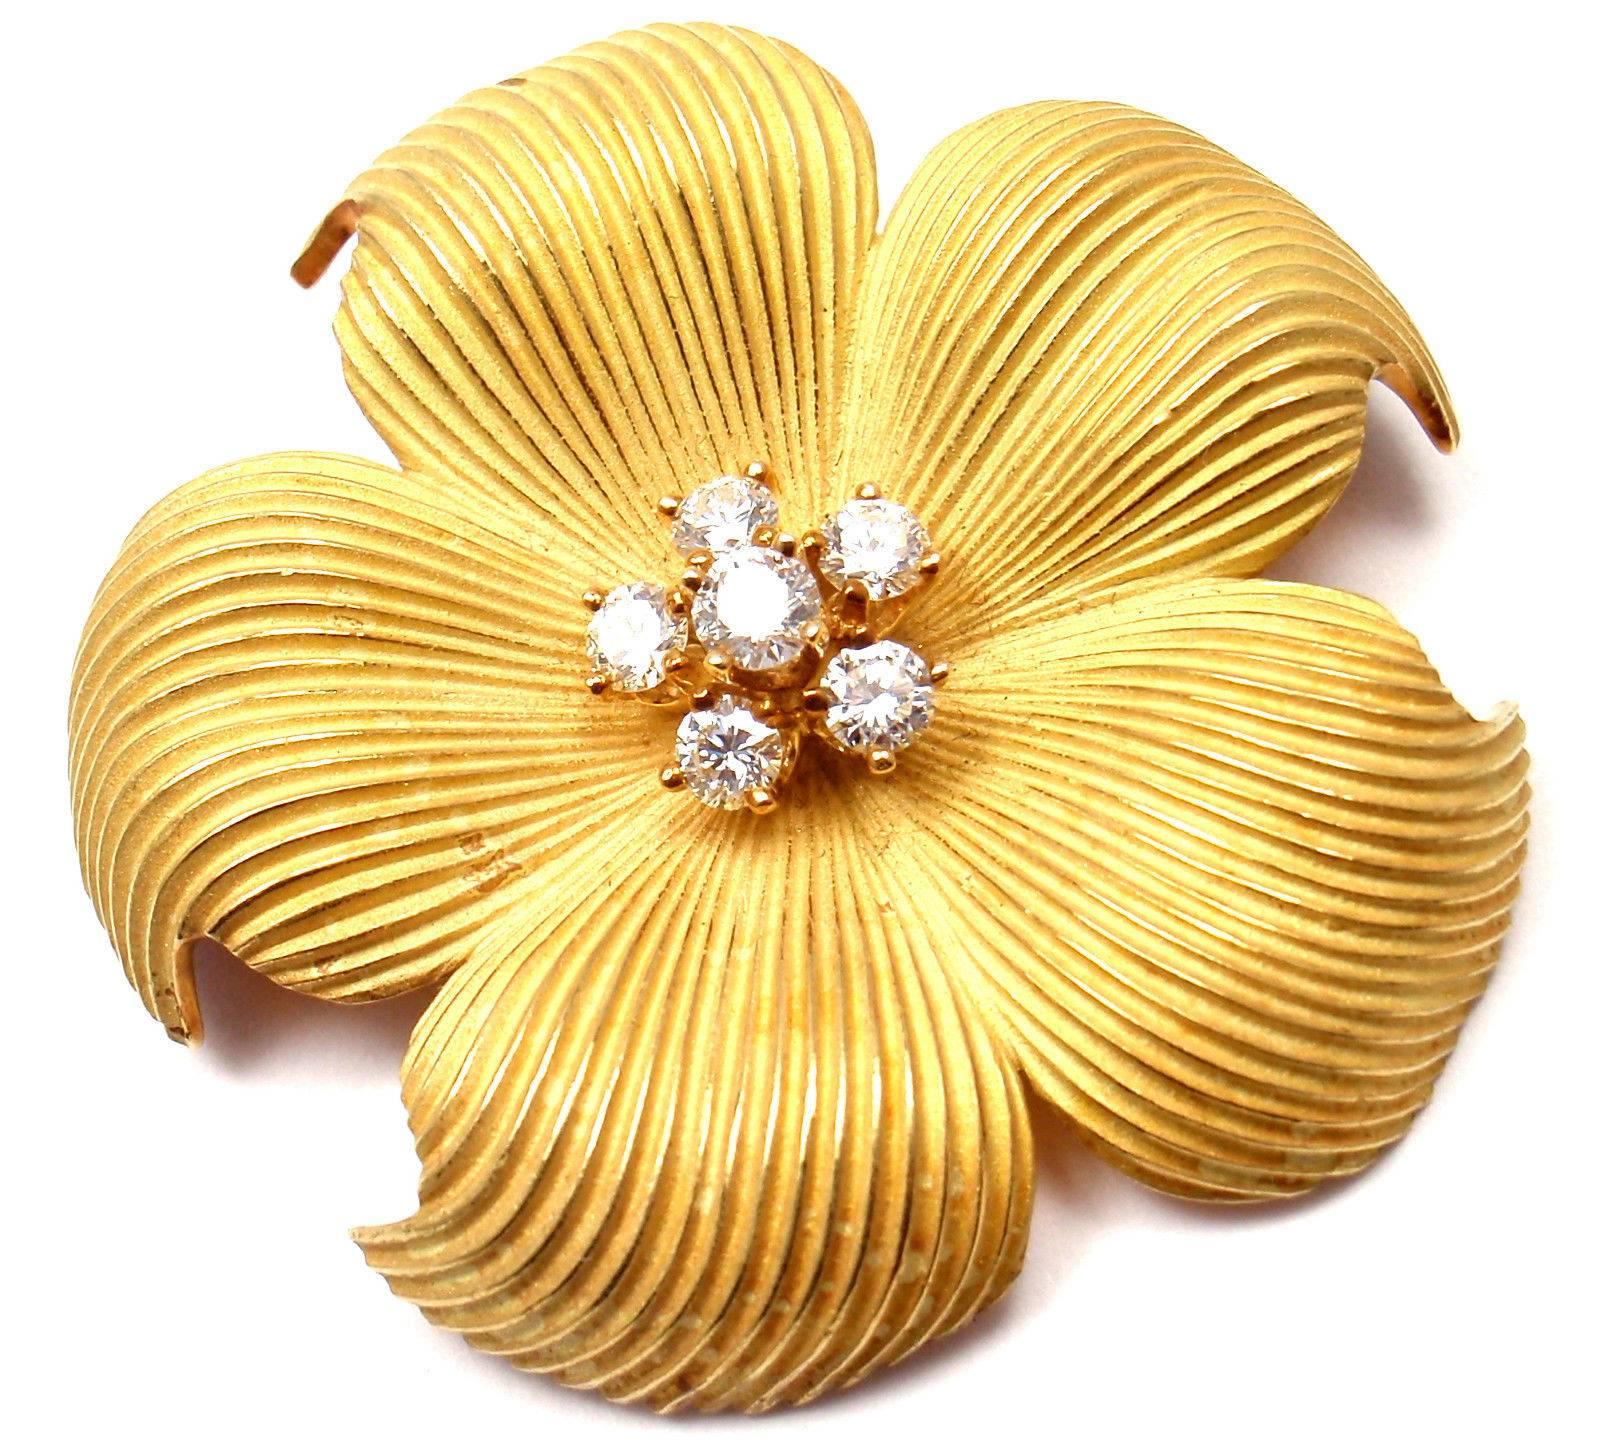 18k Yellow Gold Diamond Dogwood Pin Brooch by Tiffany & Co. 
With 6 round brilliant cut diamonds VS1 clarity, G color total weight approx. .65ct

Details: 
Measurements: 40mm x 40mm
Weight: 23.4 grams
Stamped Hallmarks: Tiffany & Co 750